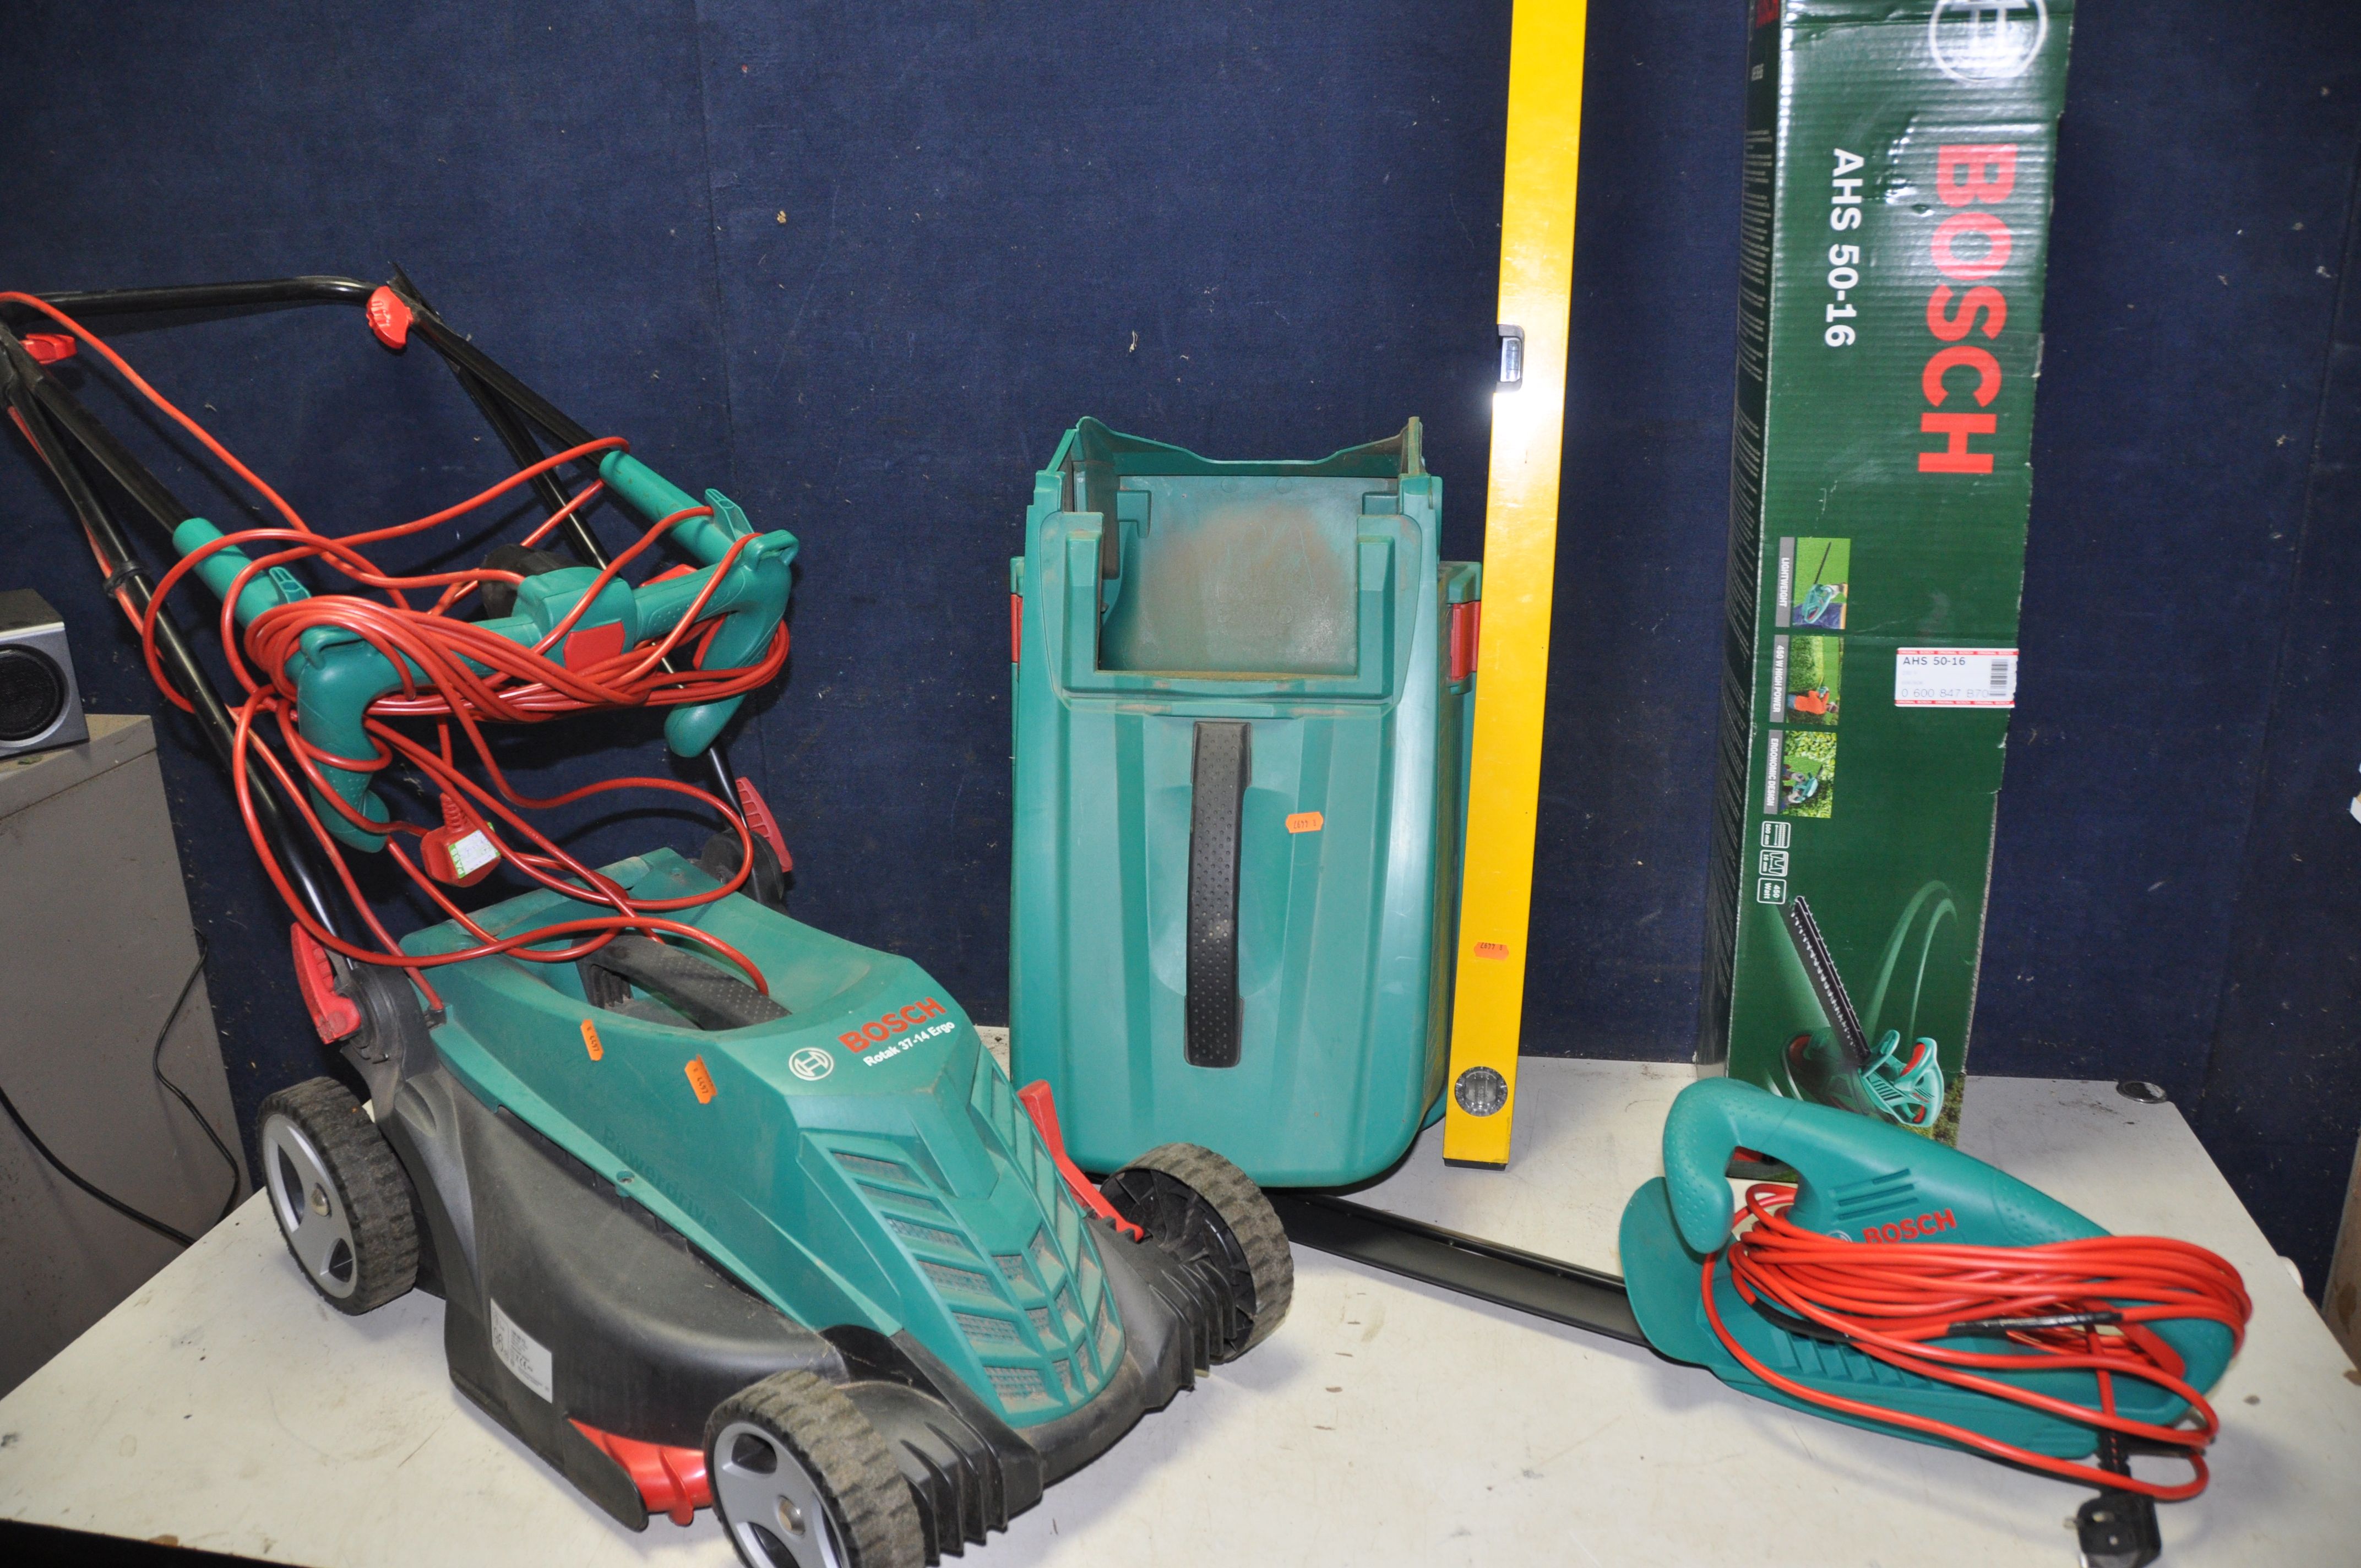 A BOSCH ROTAK 37-14 ERGO LAWN MOWER with grass box along with a Bosch AHS50-16 electric hedge